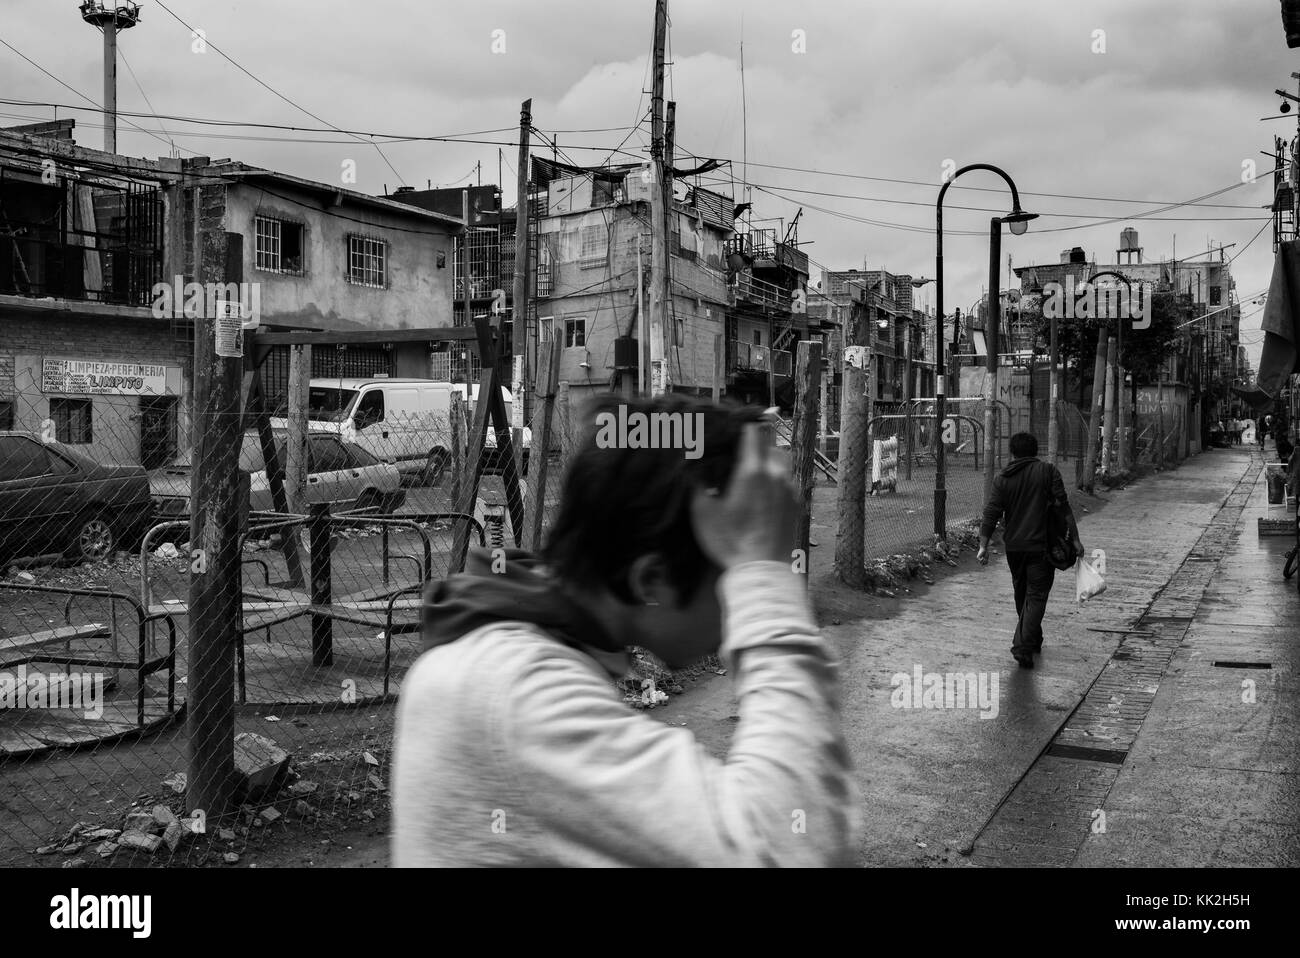 June 6, 2015 - While going through different processes, including the occasional attempt to urbanization or eradication, the villas are now self-built neighbourhoods, largely devoid of infrastructure and basic services: roads, electricity, water, sewage system. Credit: Gabriele Orlini/ZUMA Wire/Alamy Live News Stock Photo